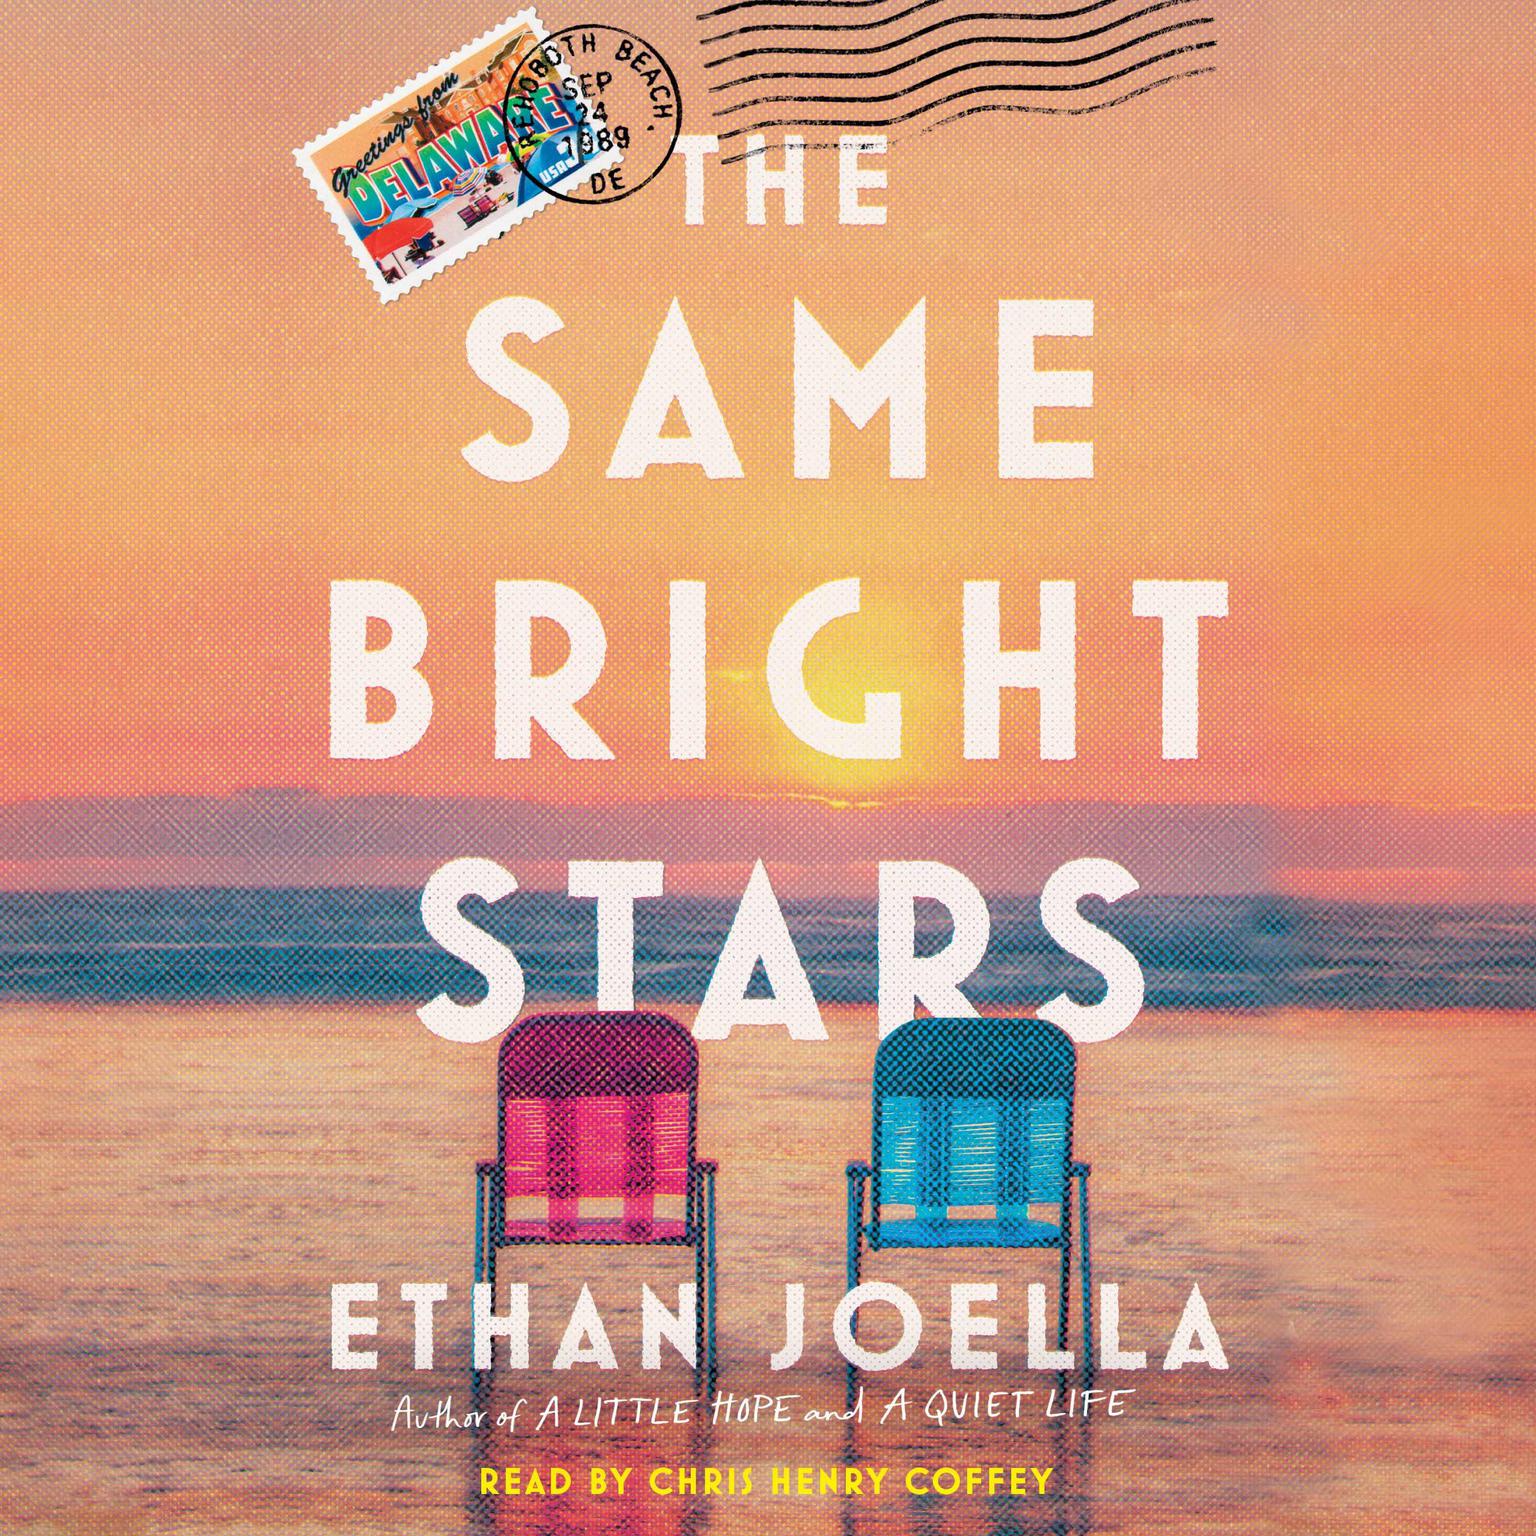 The Same Bright Stars: A Novel Audiobook, by Ethan Joella